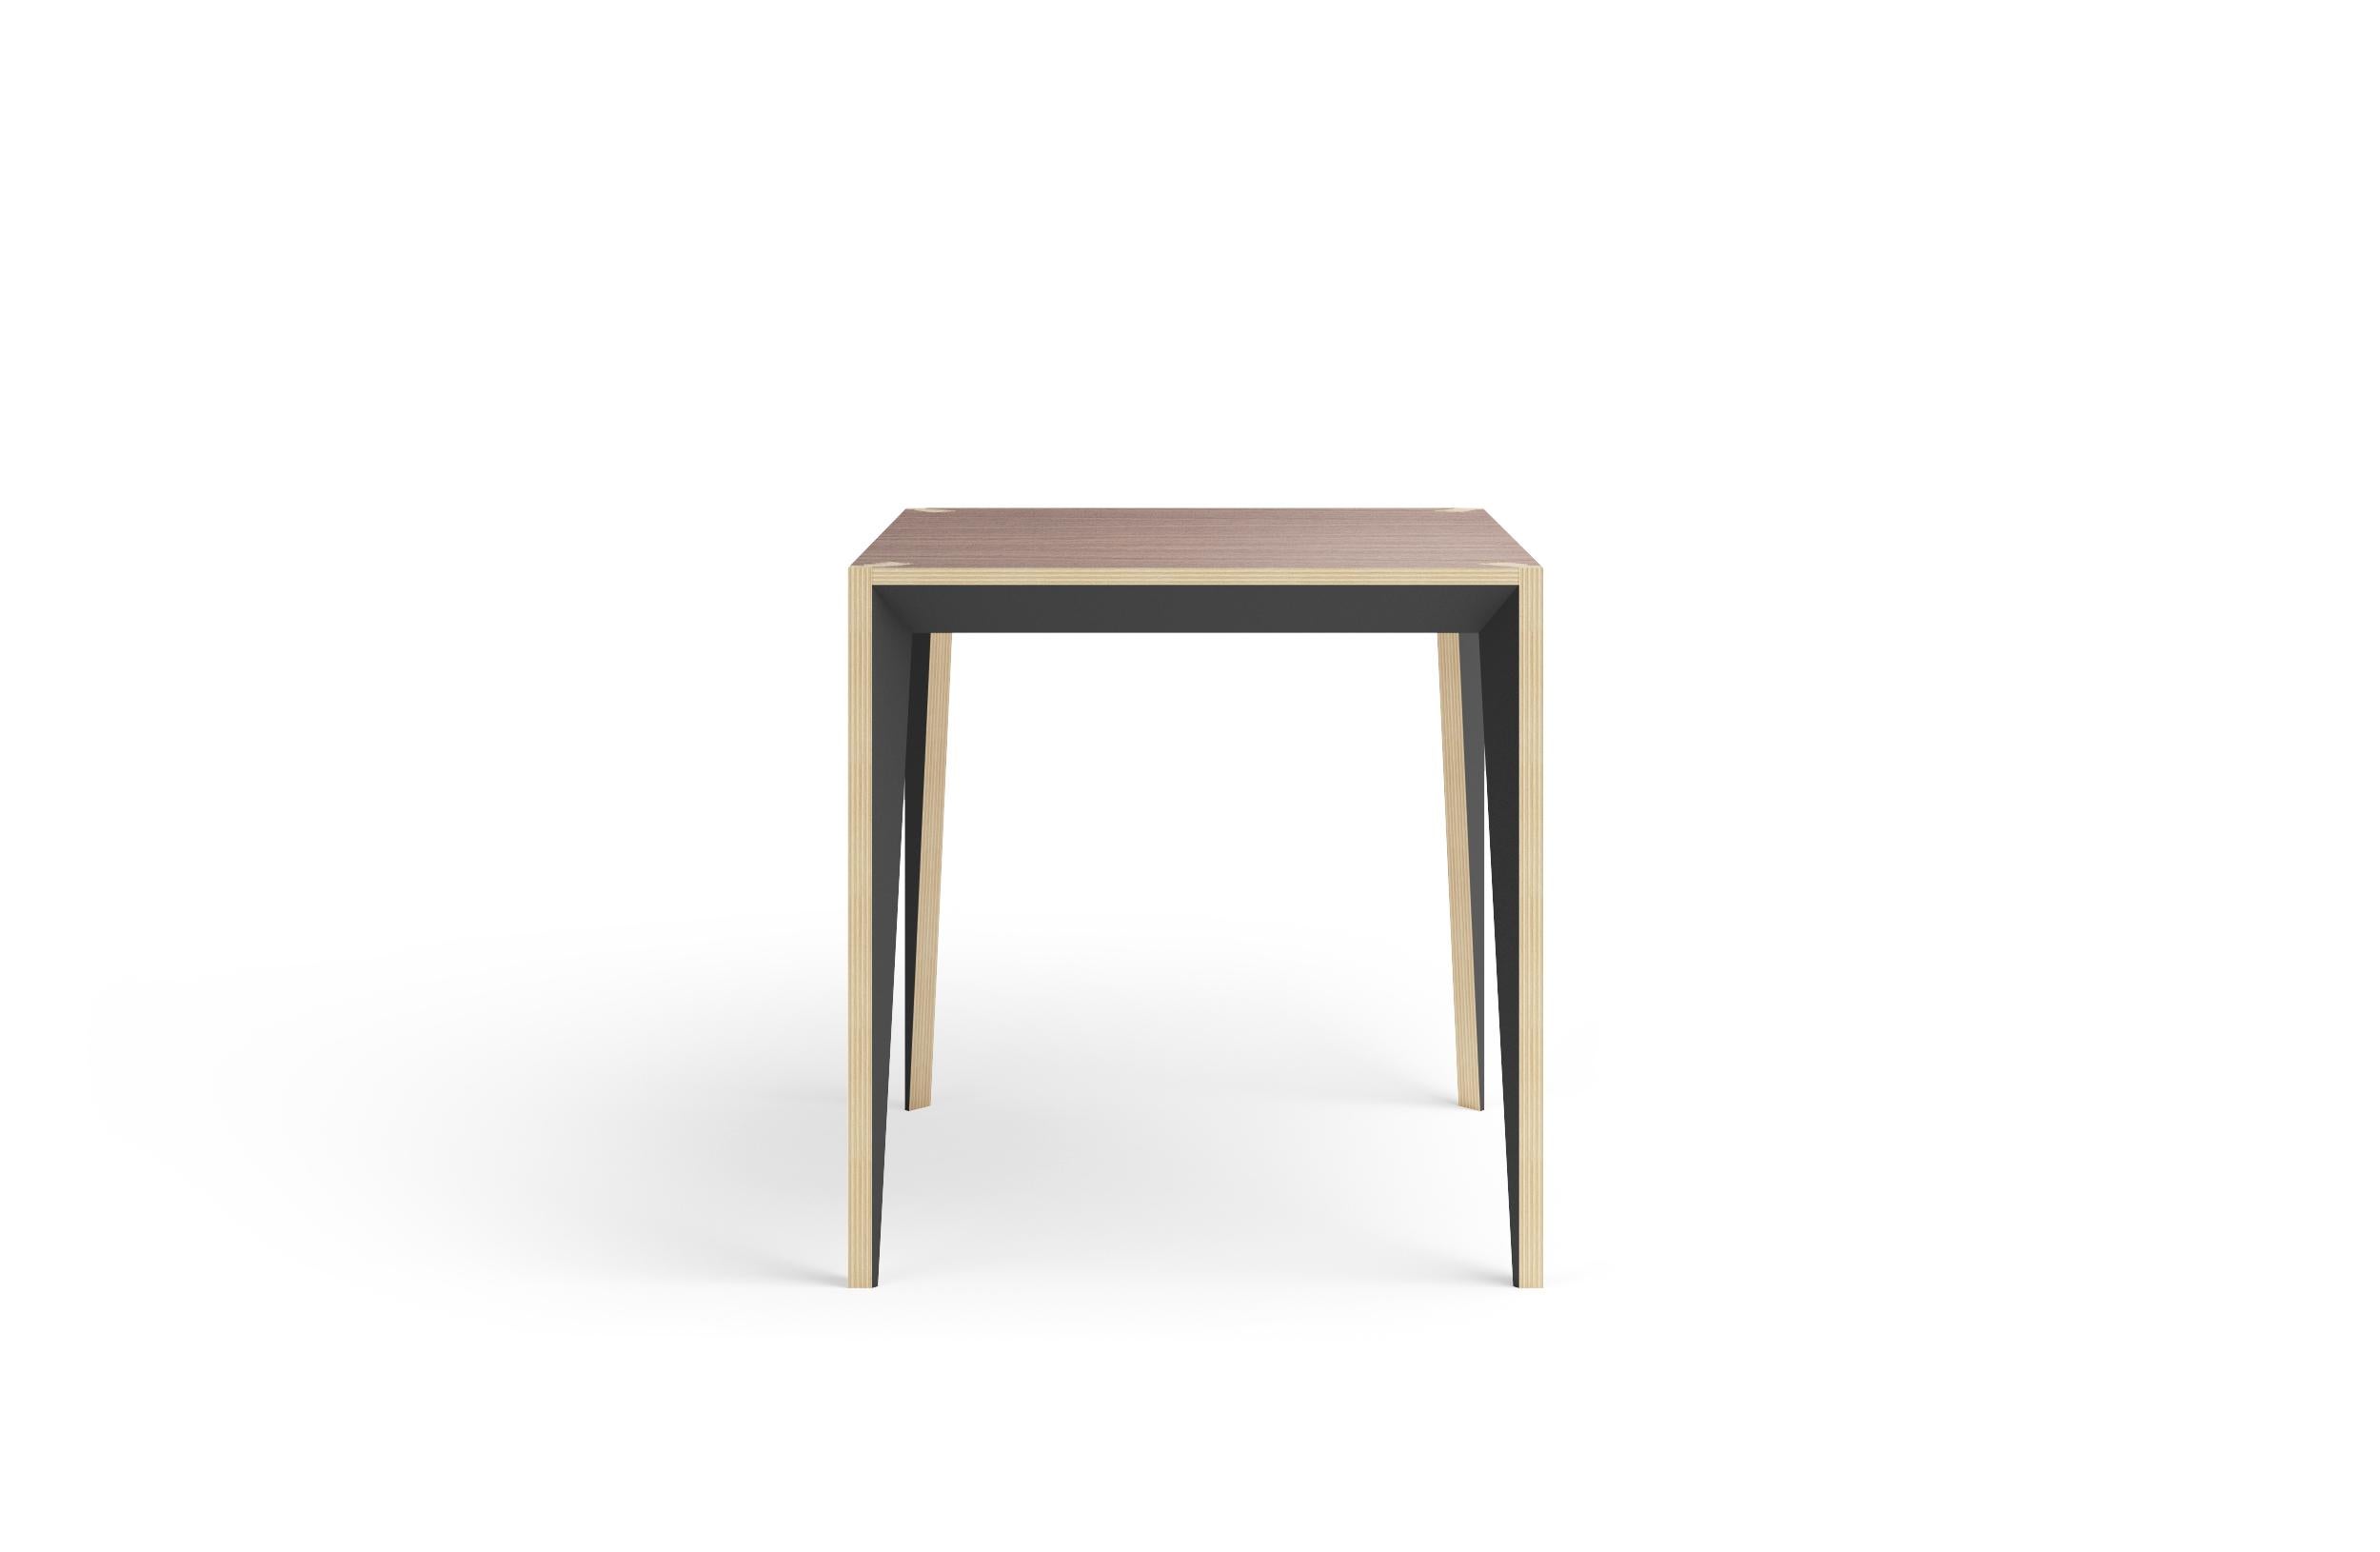 Merging clean lines with warm materials, the faceted geometry of the MiMi square table creates a slender, elegant profile punctuated with angled surfaces that capture light. The MiMi line was a NYCxDesign 2018 Honoree and German Design Award 2019